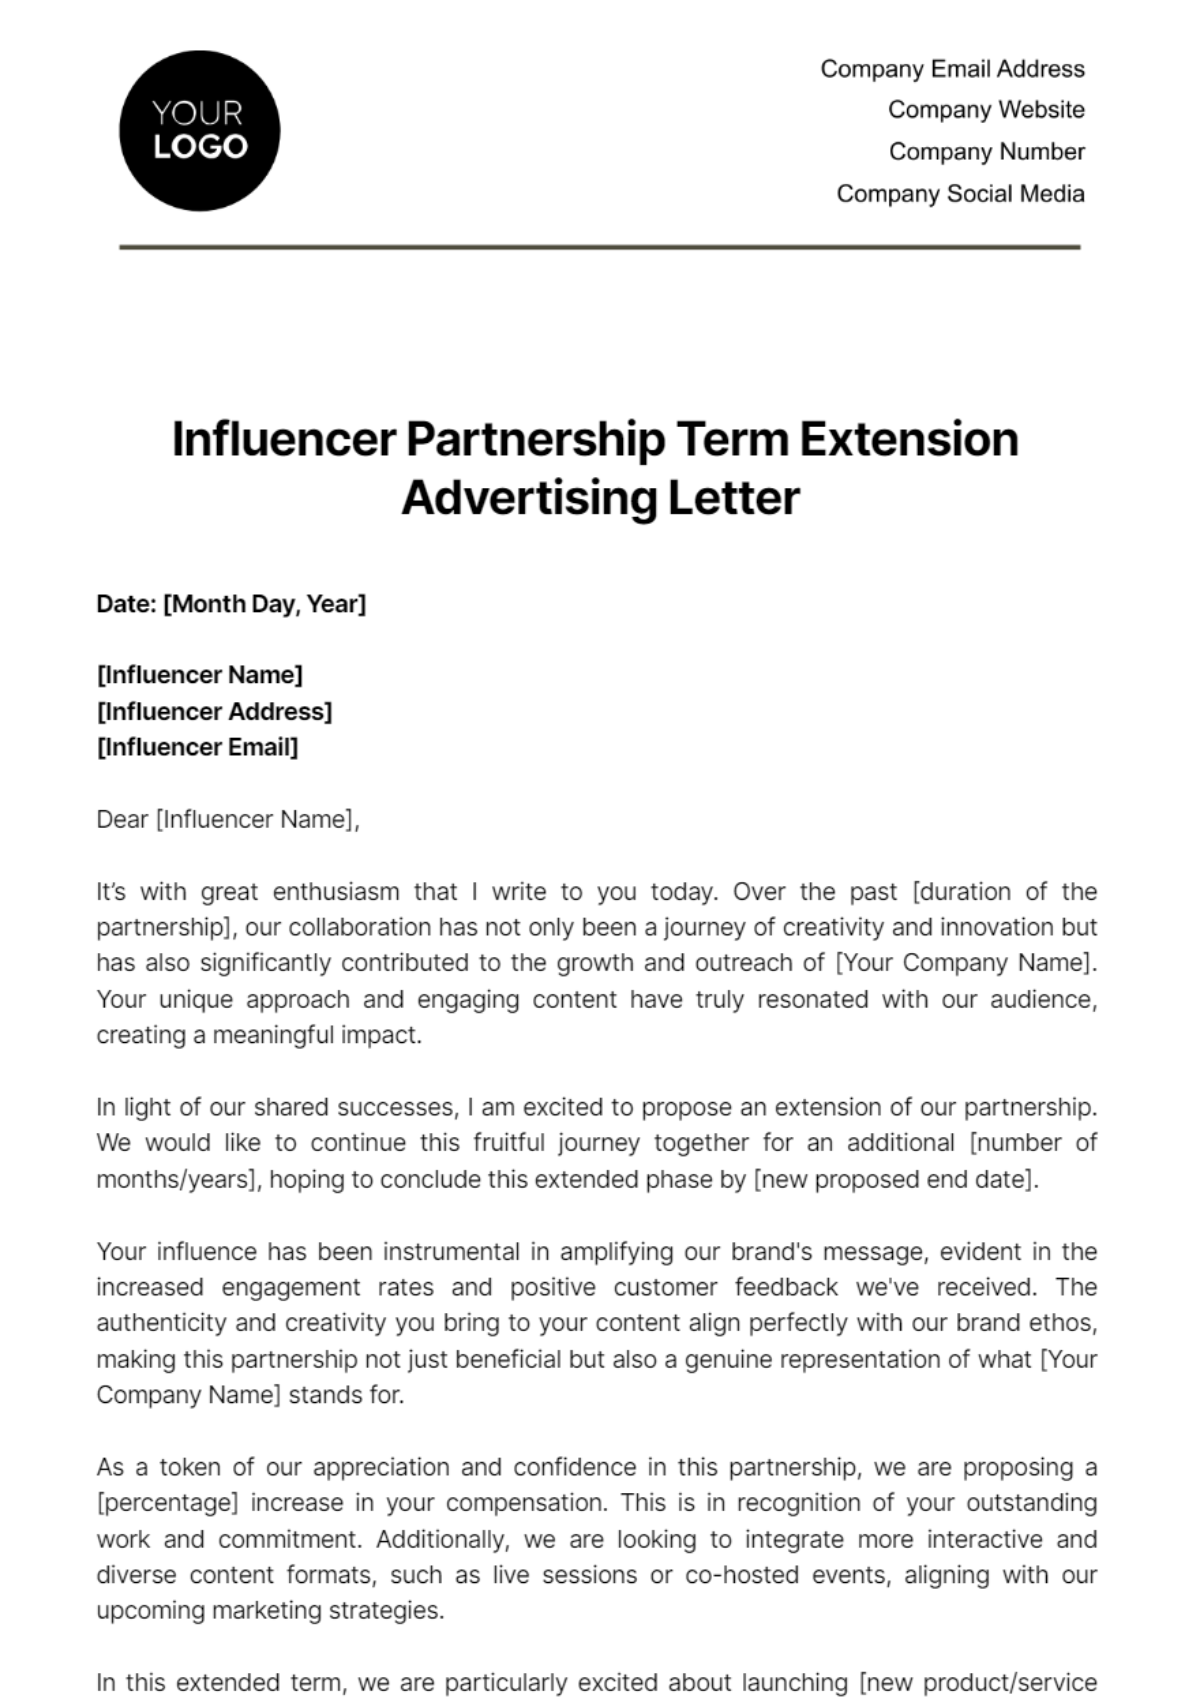 Free Influencer Partnership Term Extension Advertising Letter Template